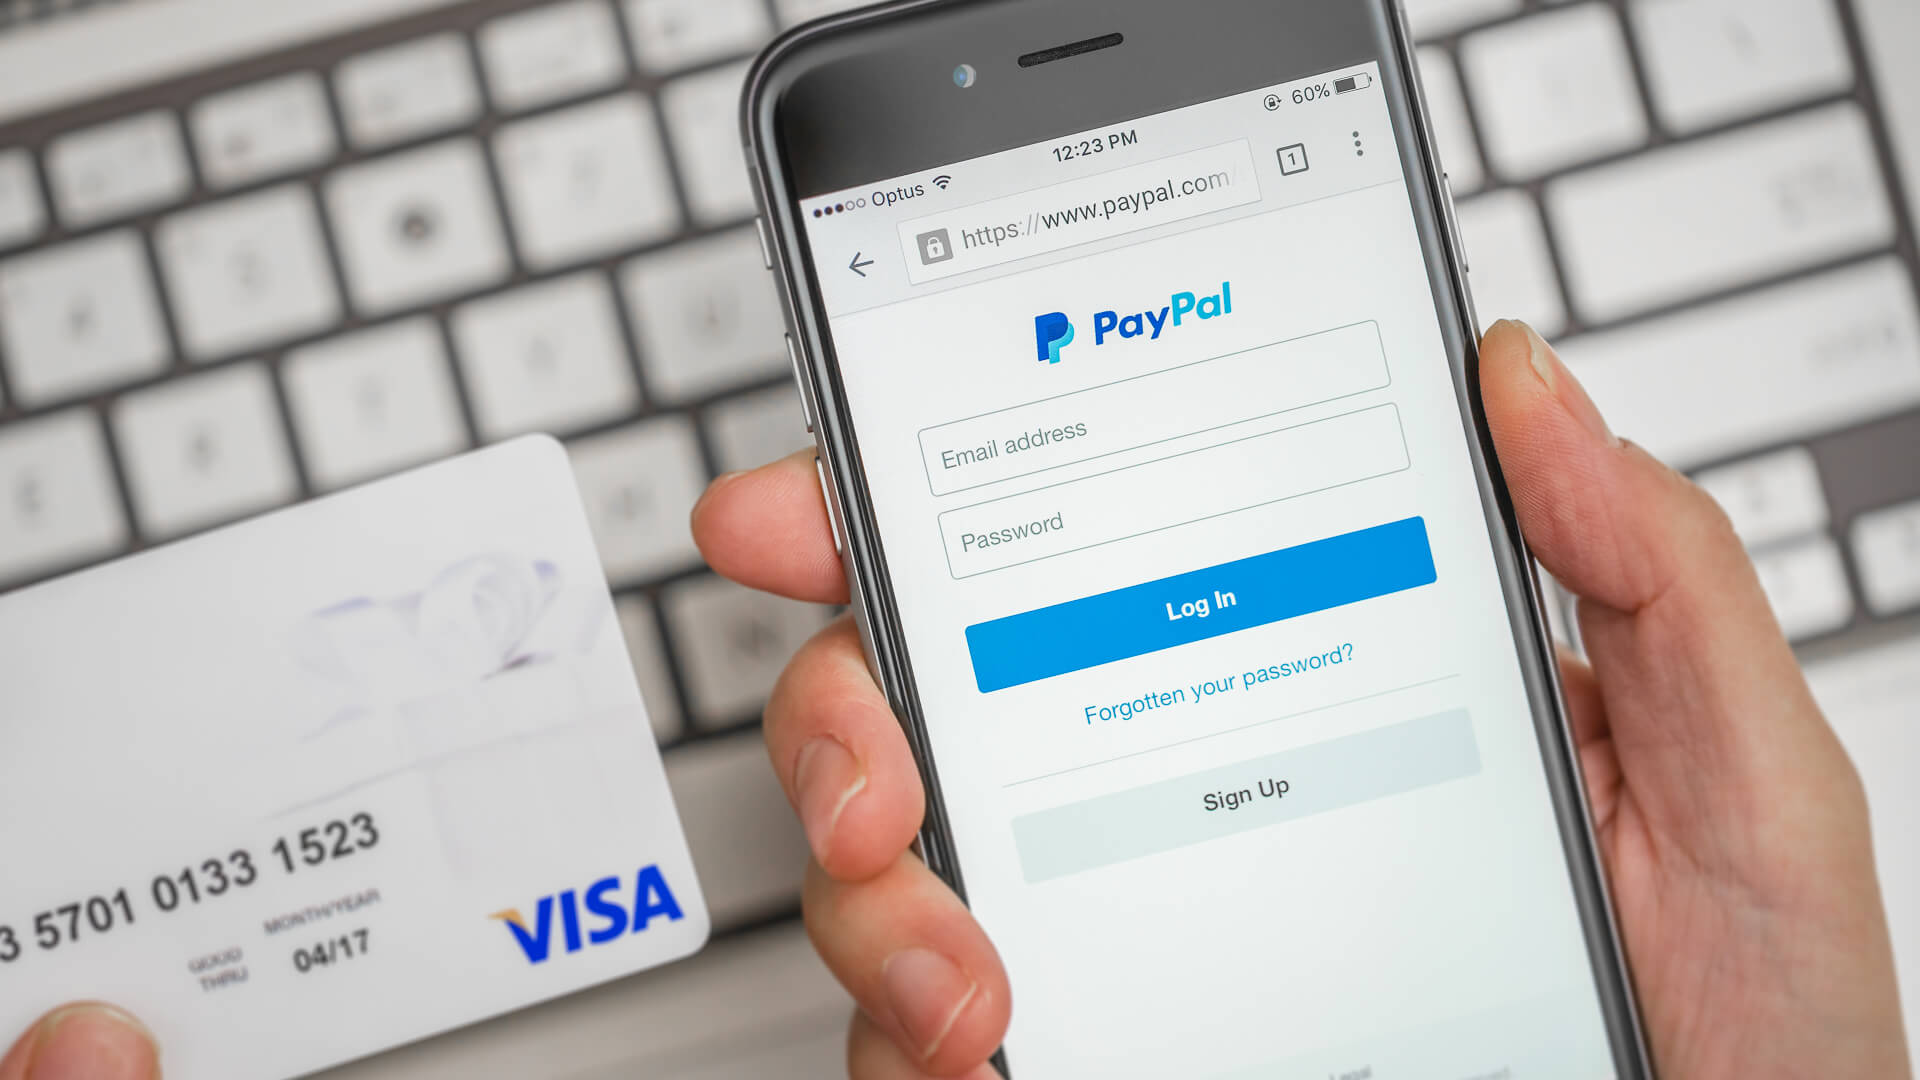 How to Add Visa Gift Card to Paypal